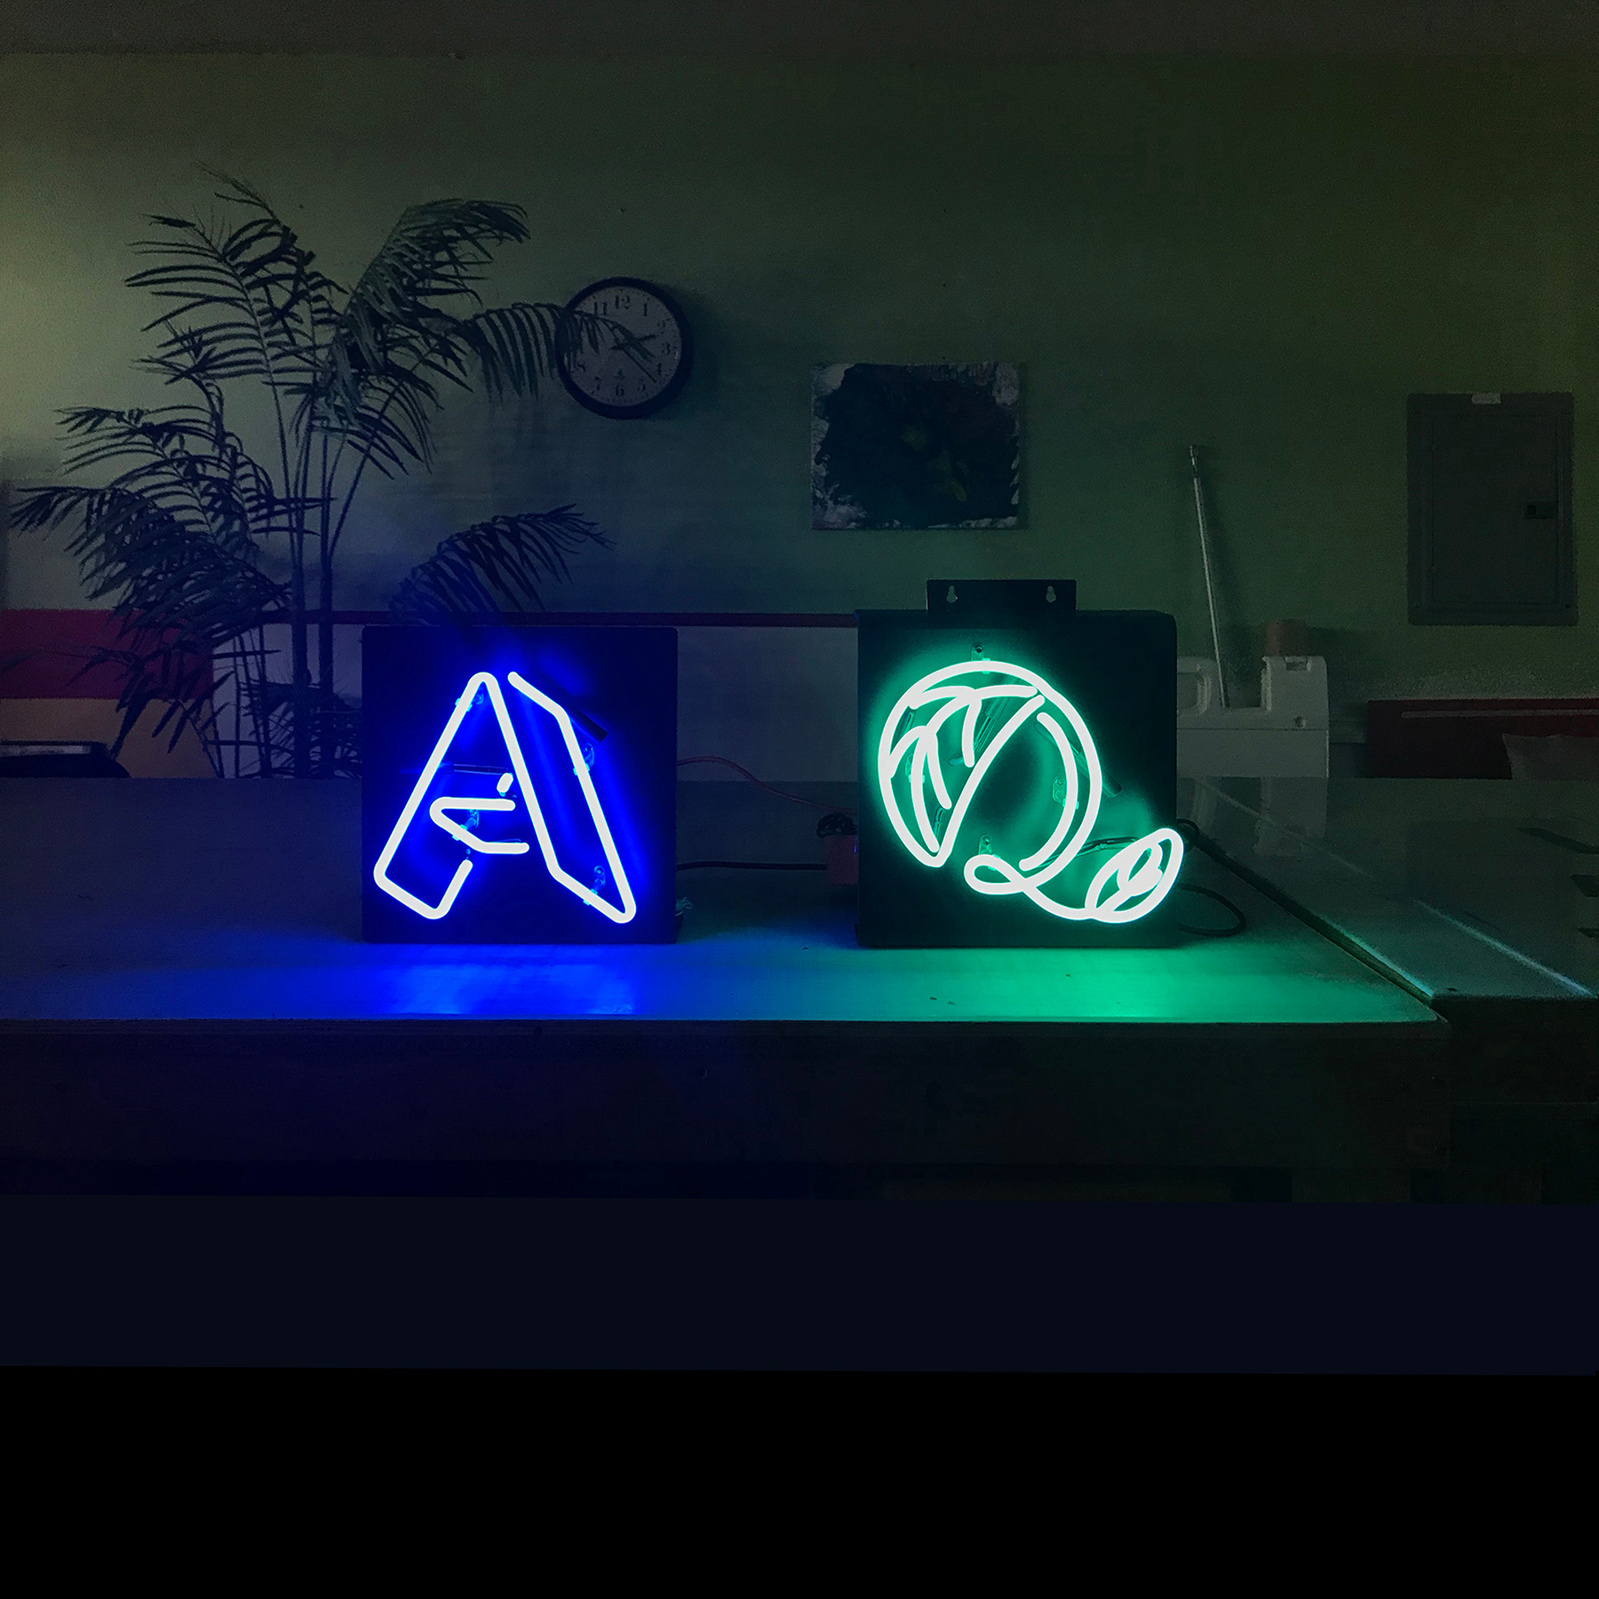 “A” and “Q” custom designed neon signs in blue and turquoise, each letter with a unique, fanciful typographic design.